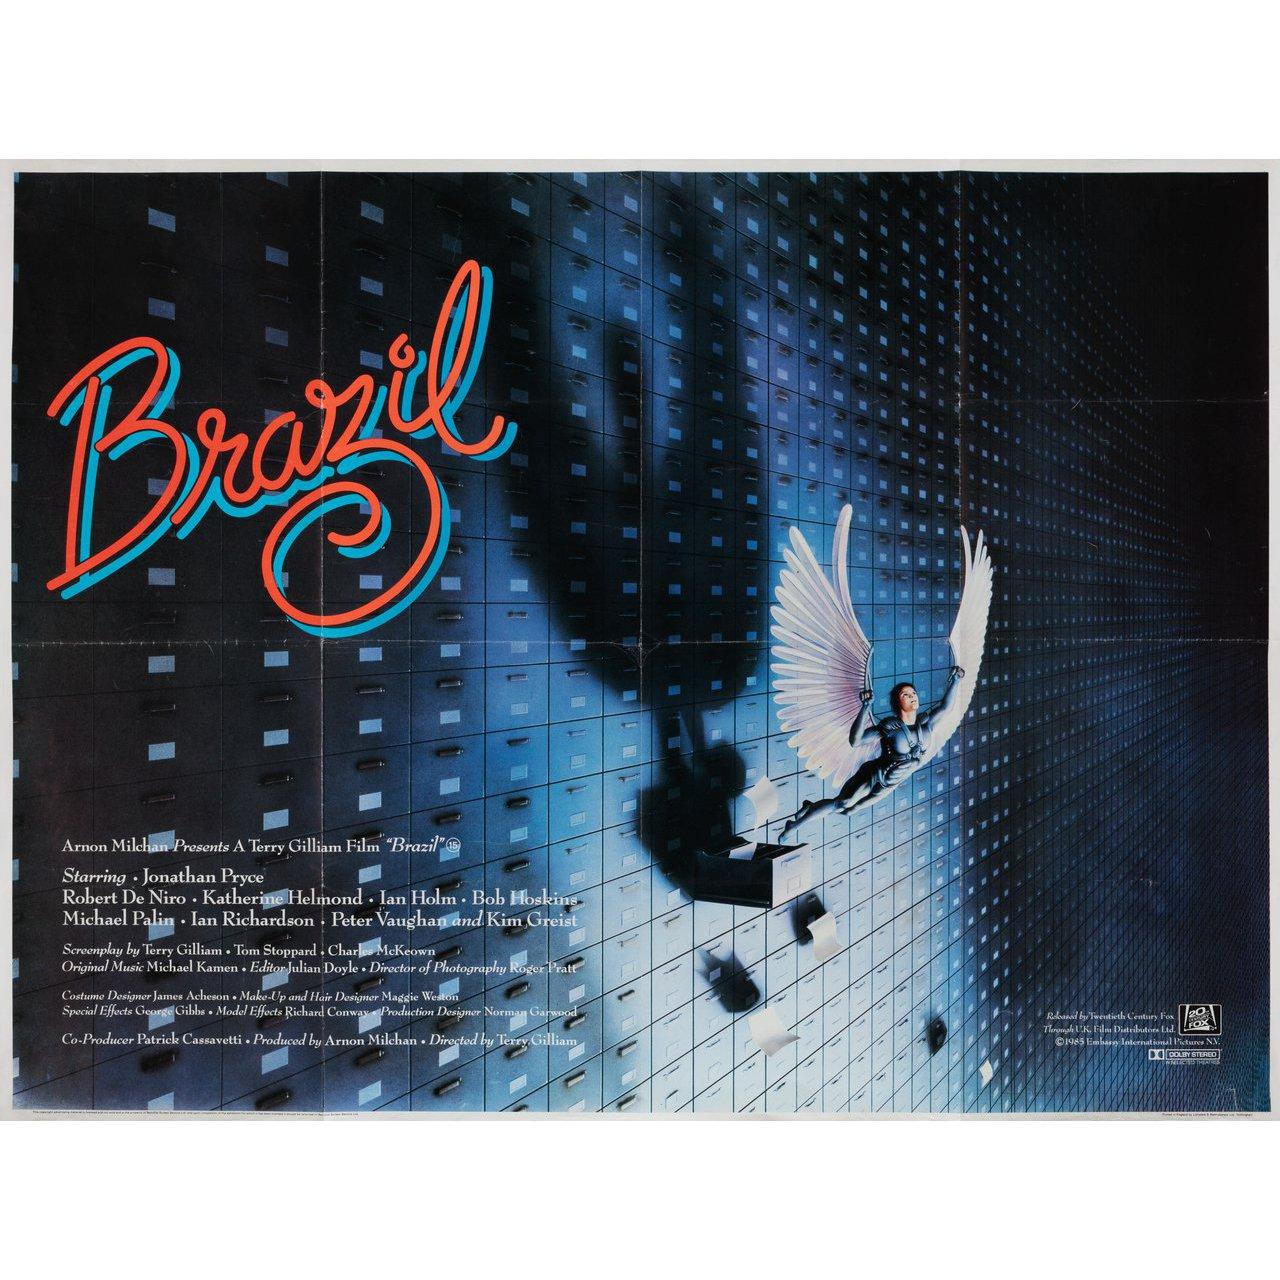 Original 1985 British quad poster for the film Brazil directed by Terry Gilliam with Jonathan Pryce / Robert De Niro / Katherine Helmond / Ian Holm. Very Good-Fine condition, folded. Many original posters were issued folded or were subsequently